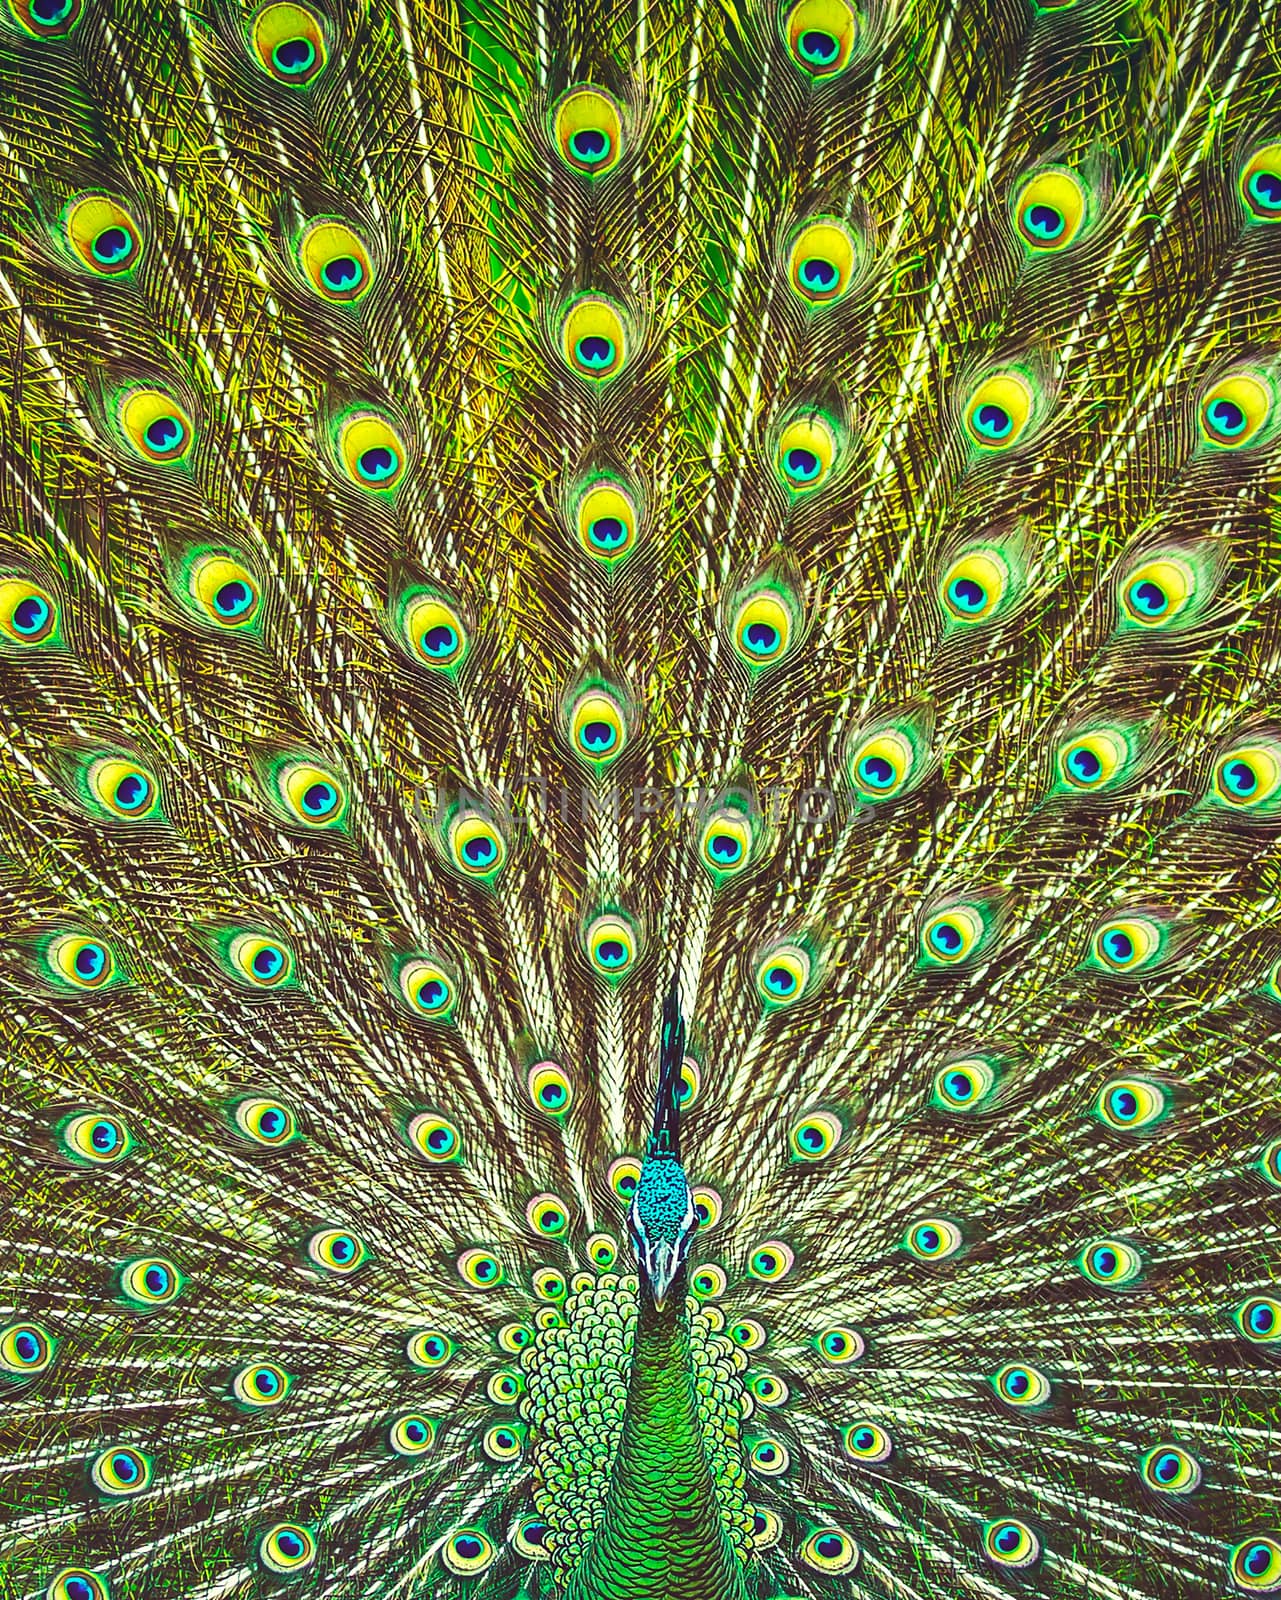 Amazing beauty of a peacock's tail by Anna_Omelchenko